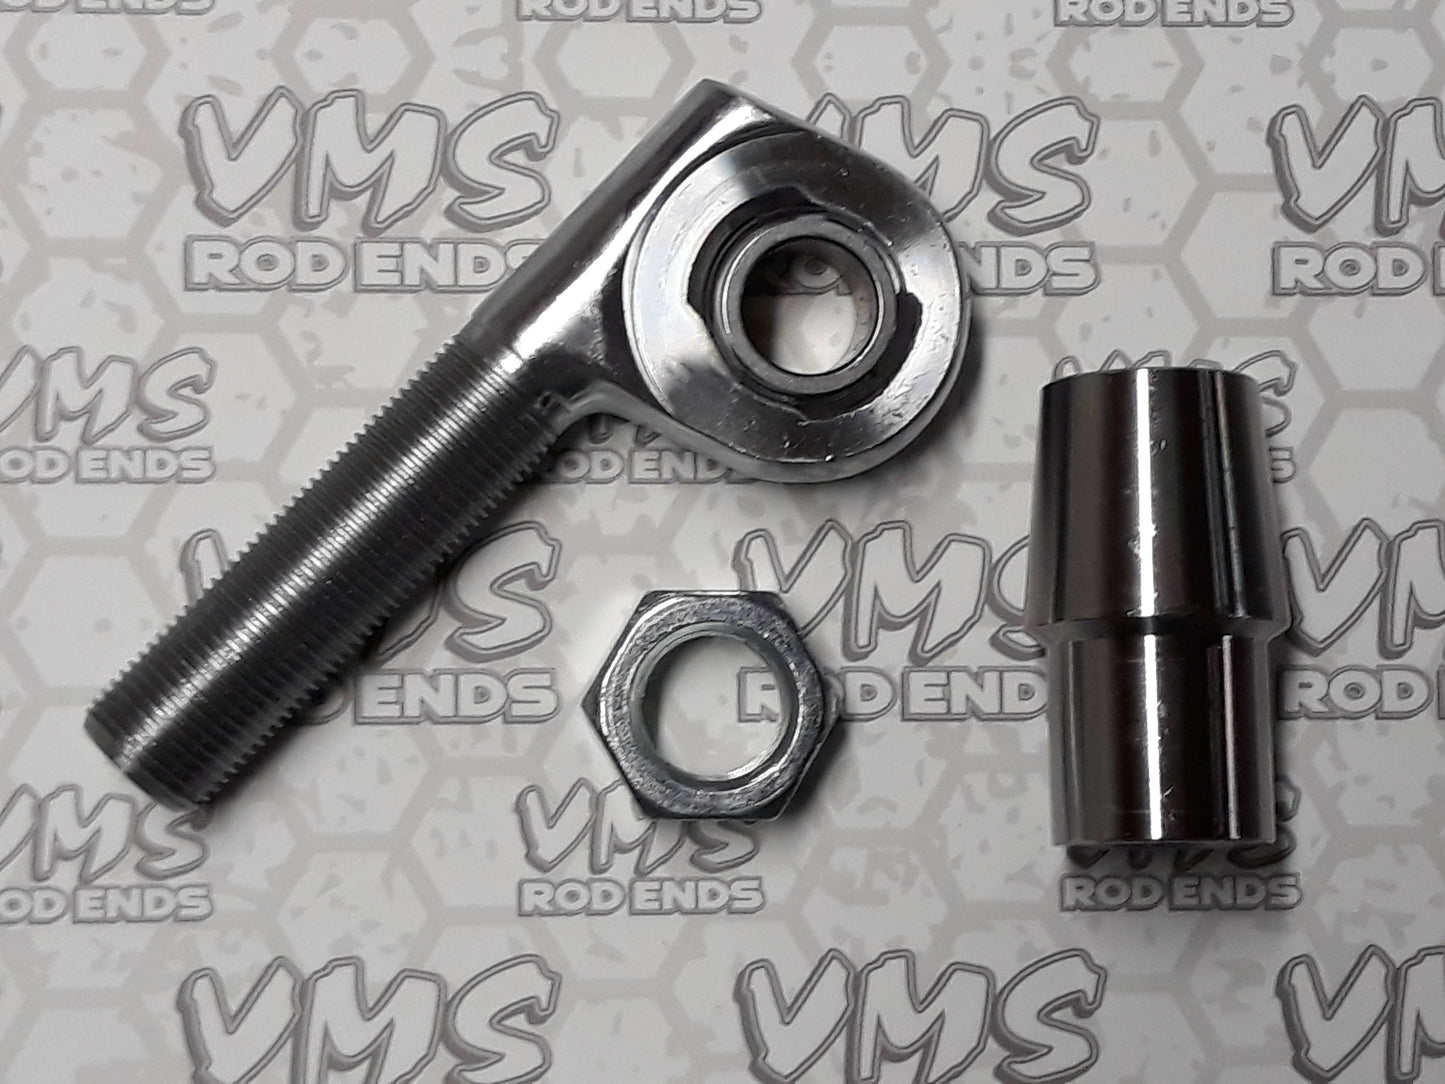 Offset Off Road Chromoly 3/4" Bore x 7/8" Shank Rod End Kit